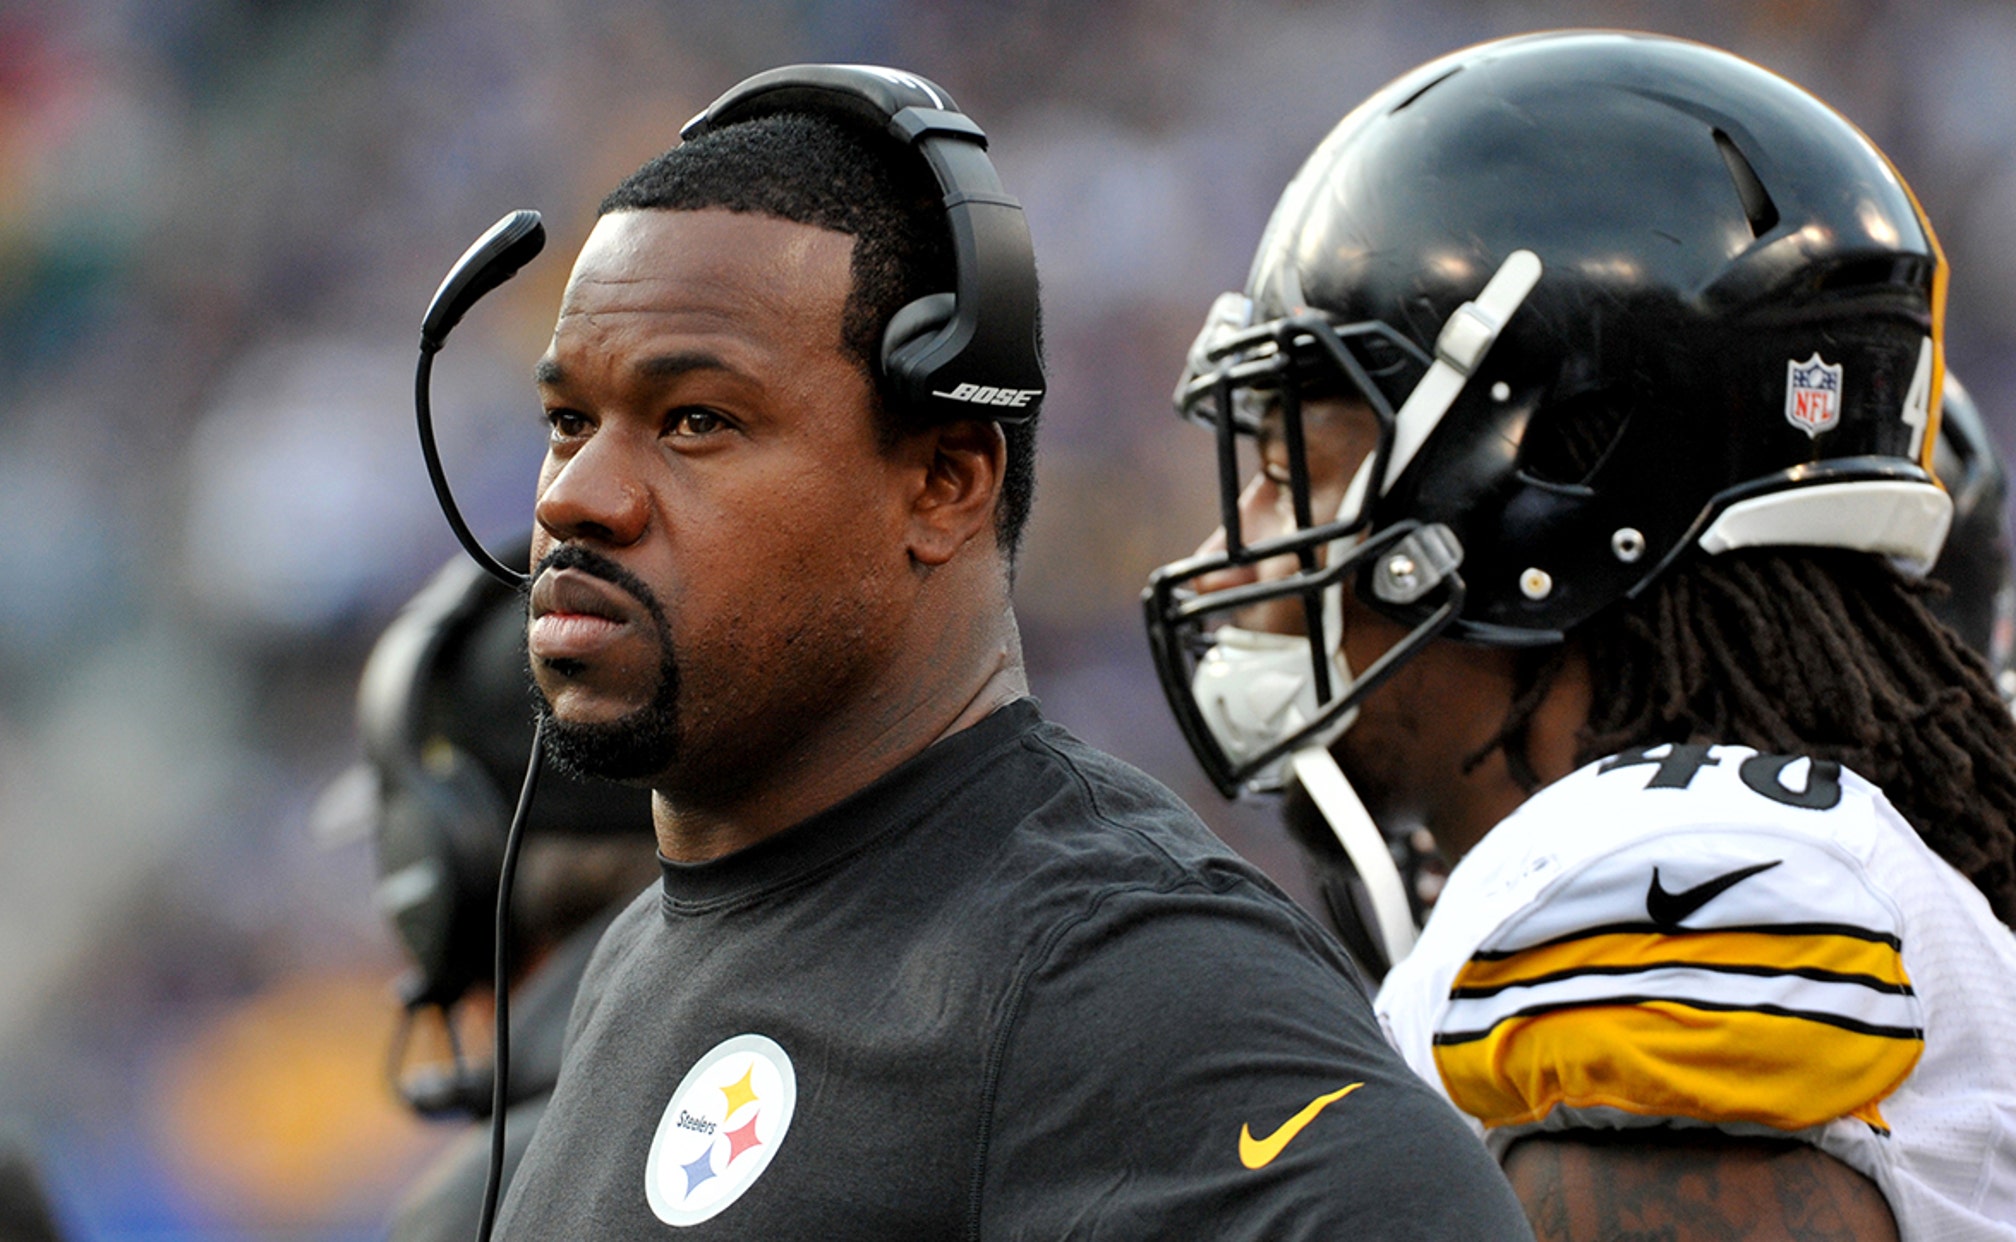 Steelers LBs coach Joey Porter arrested after altercation with police